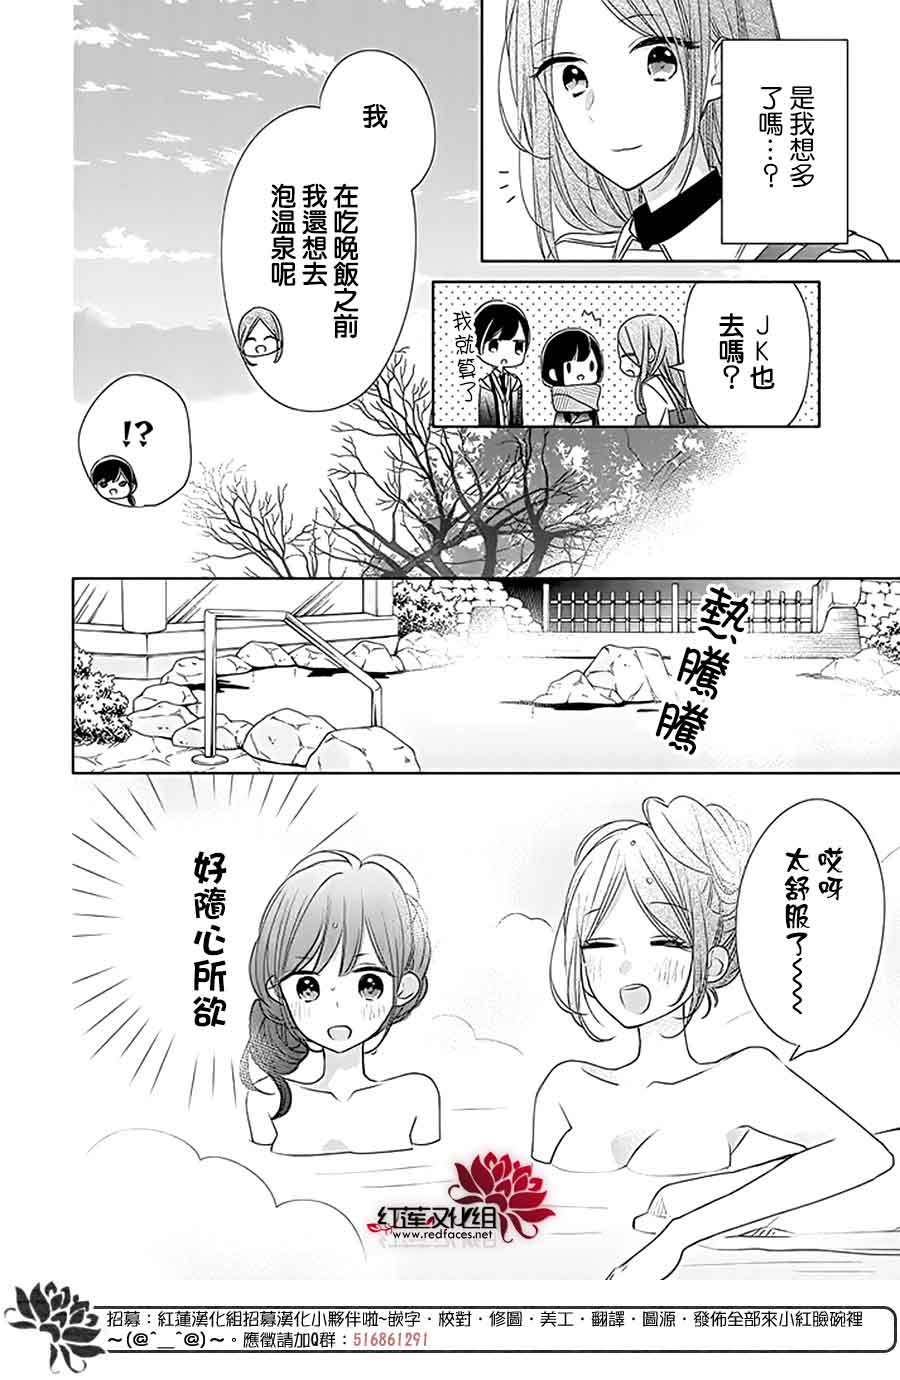 If given a second chance - 29話 - 6